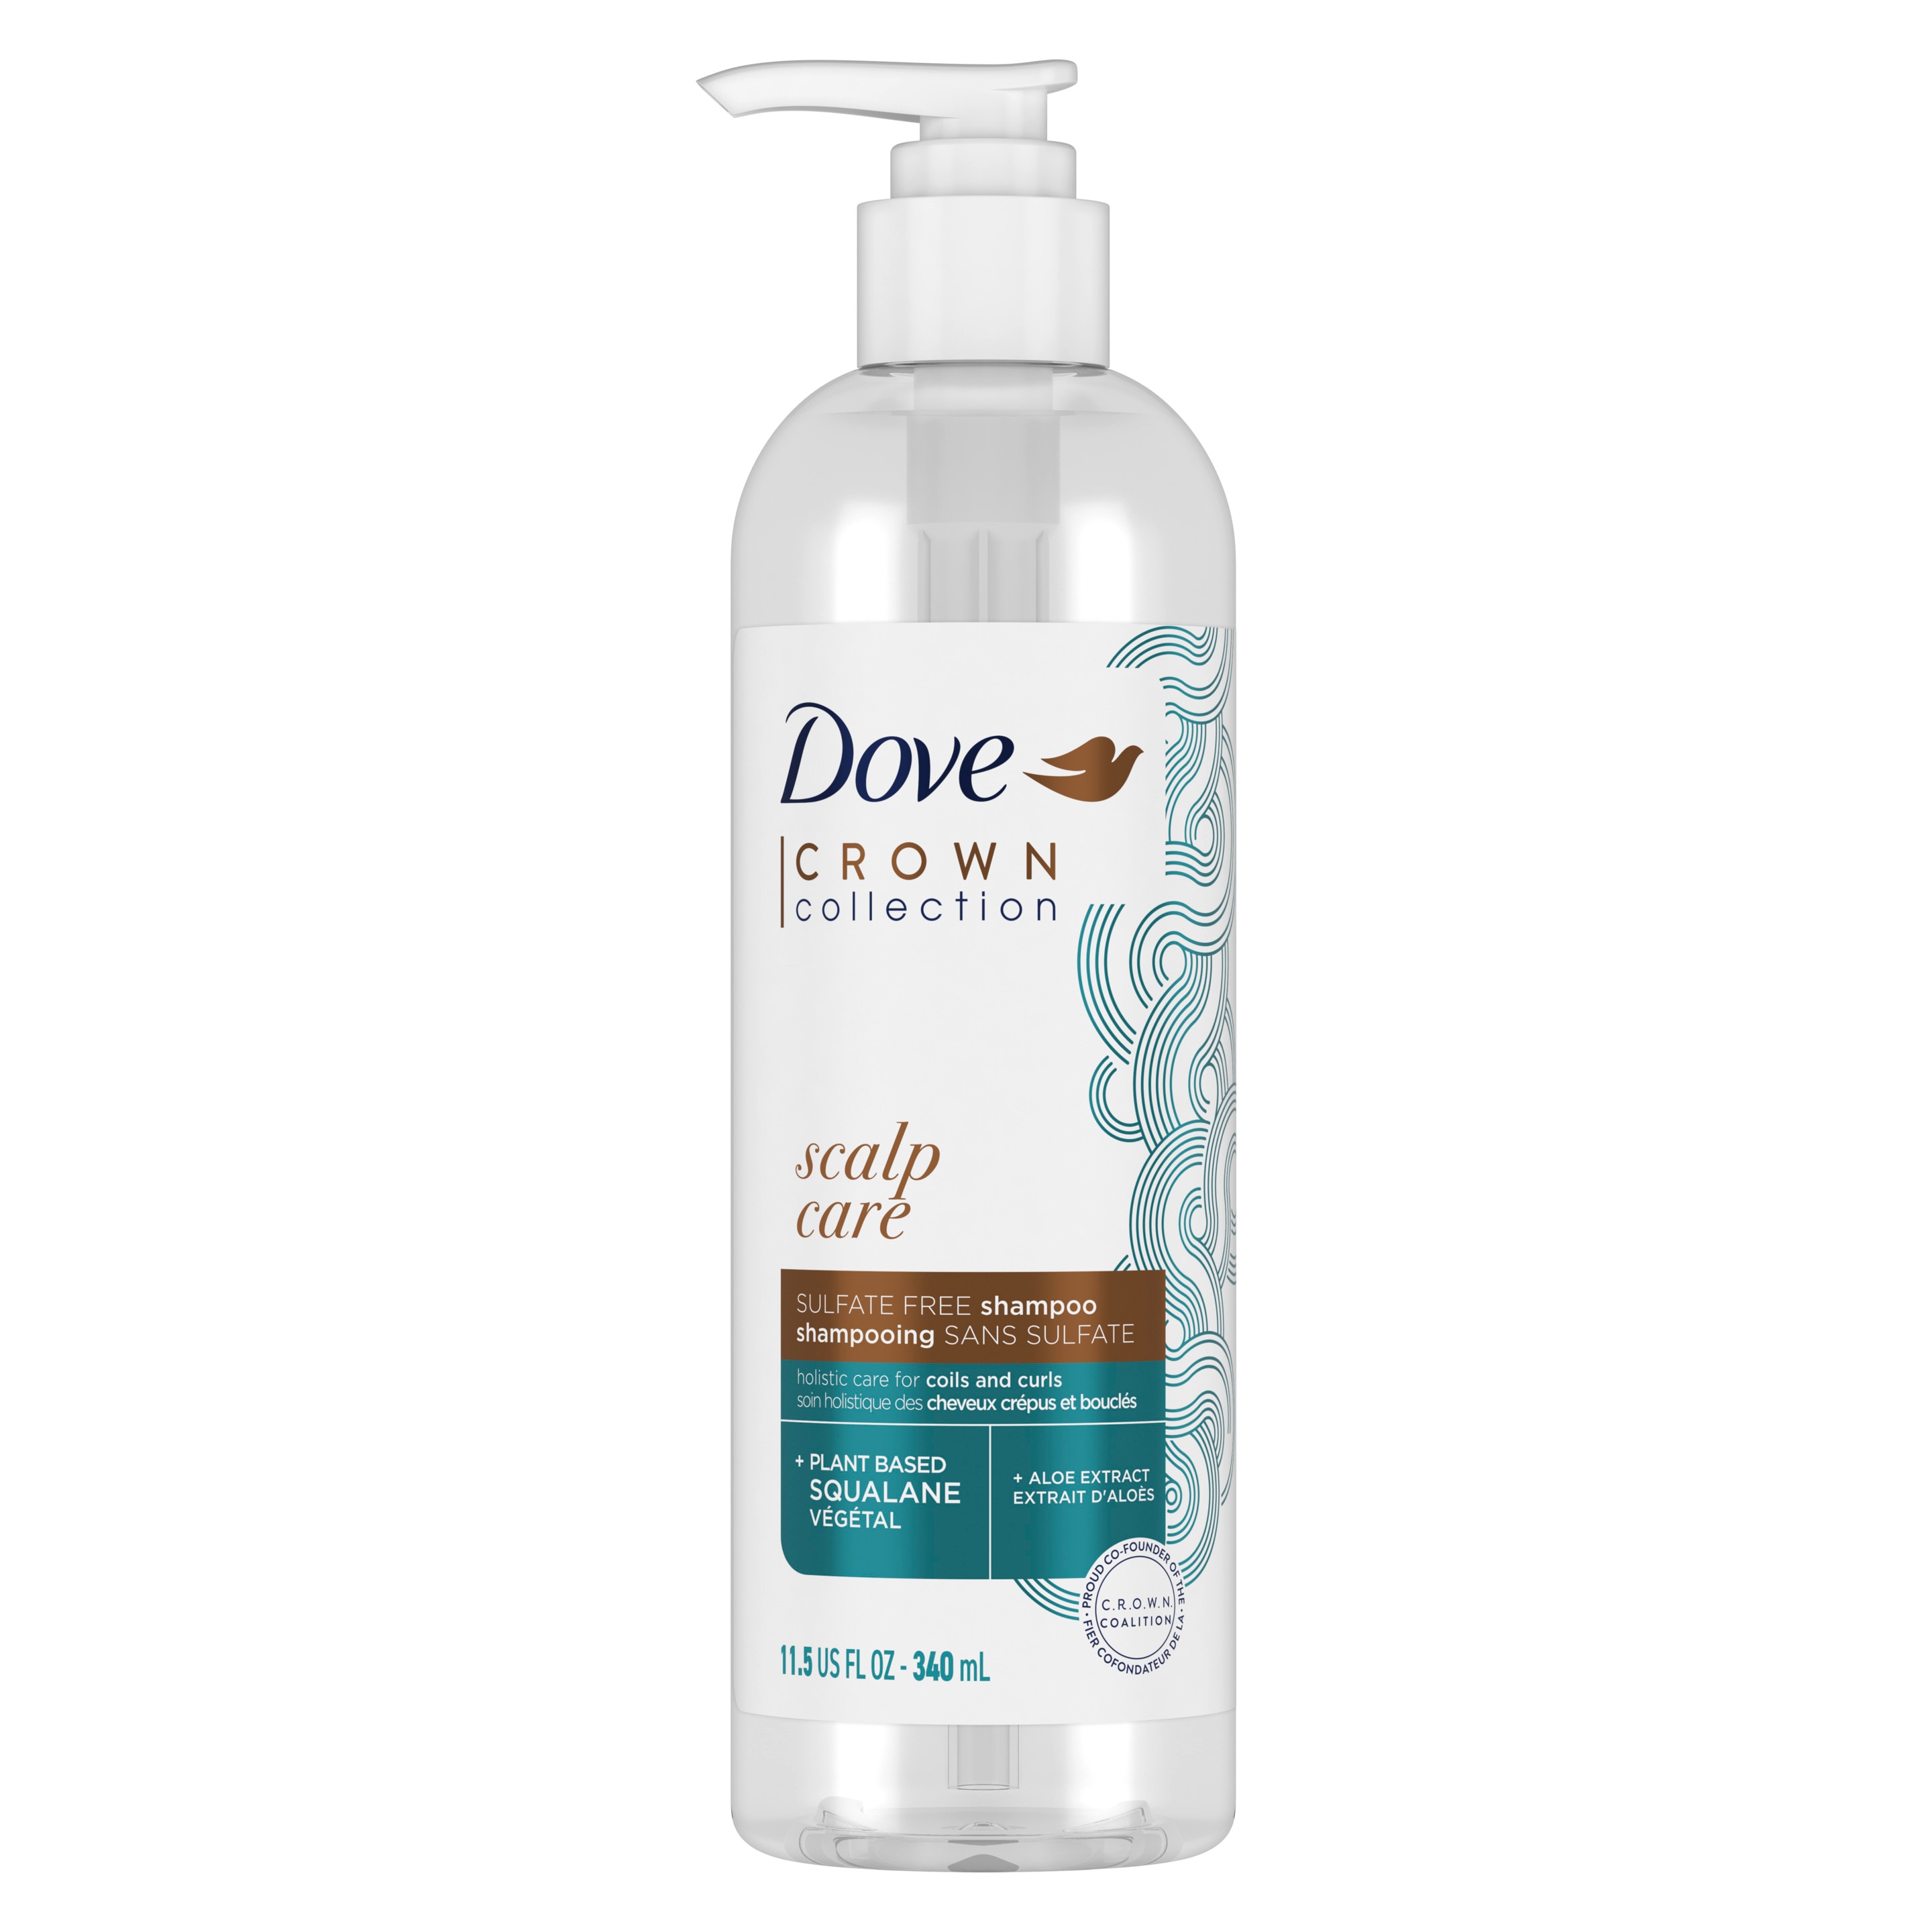 Dove Crown Collection Scalp Care Shampoo